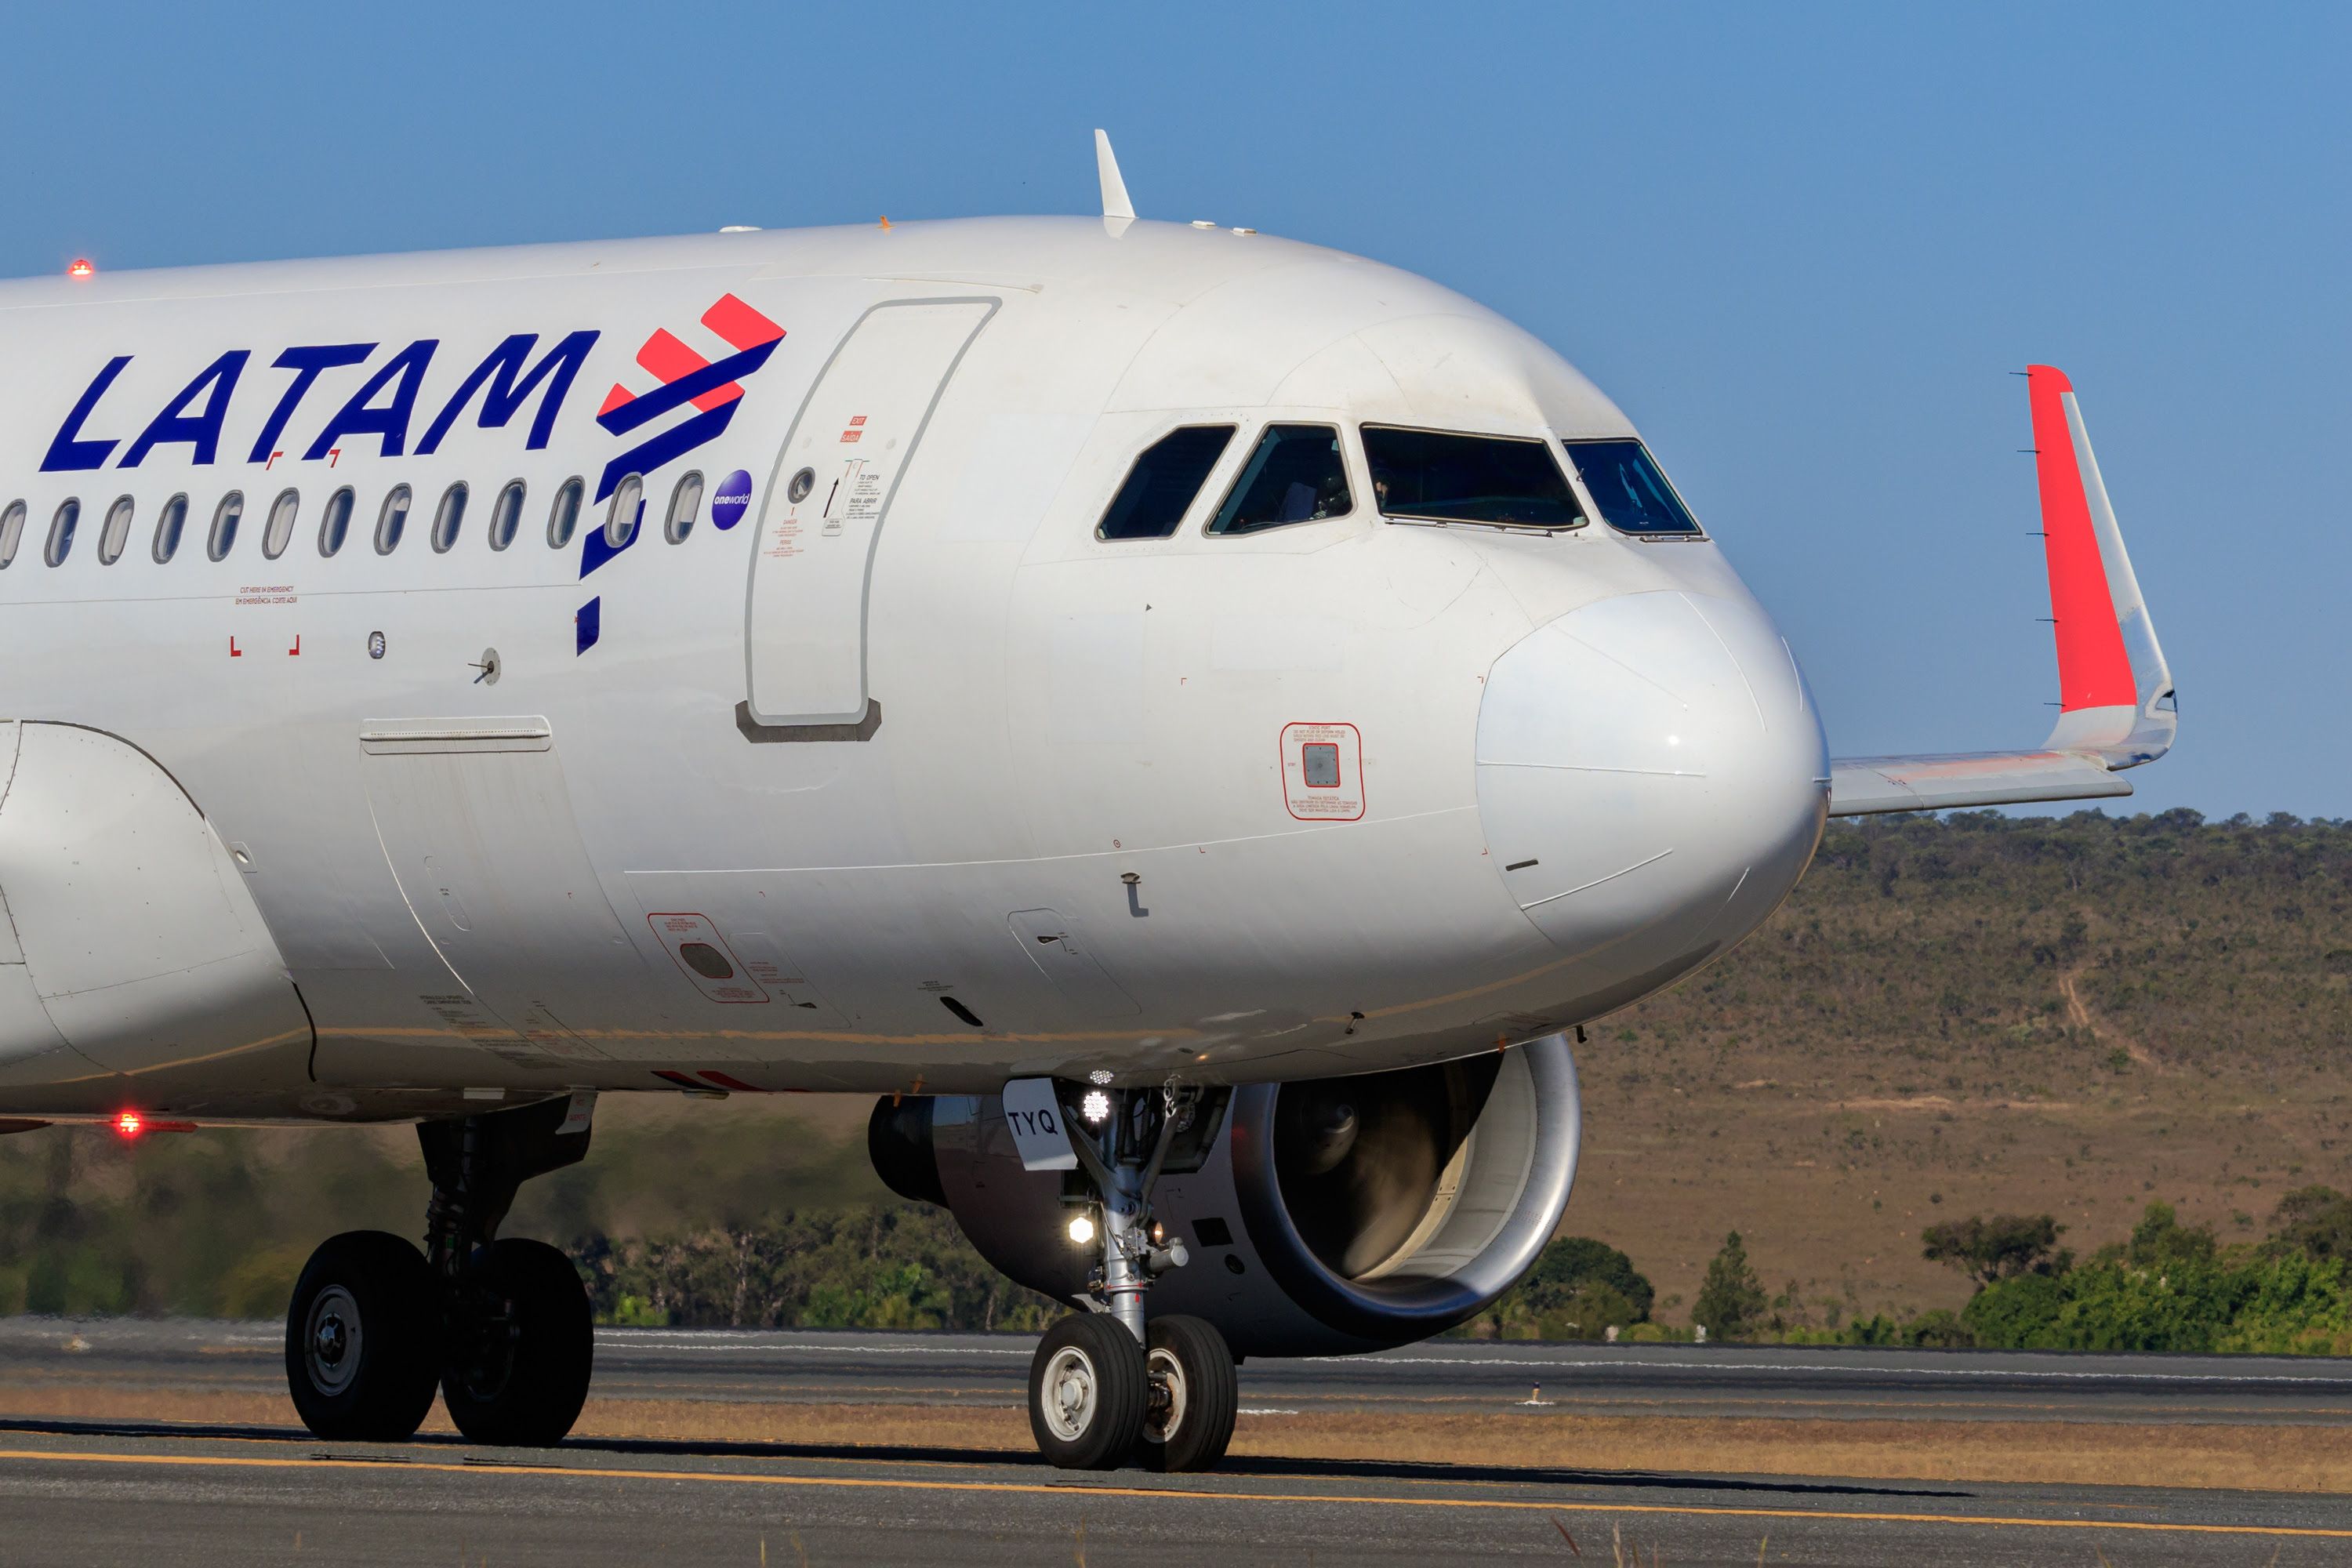 LATAM Brasil Transported More Than 120,000 Passengers To Italy Last Year